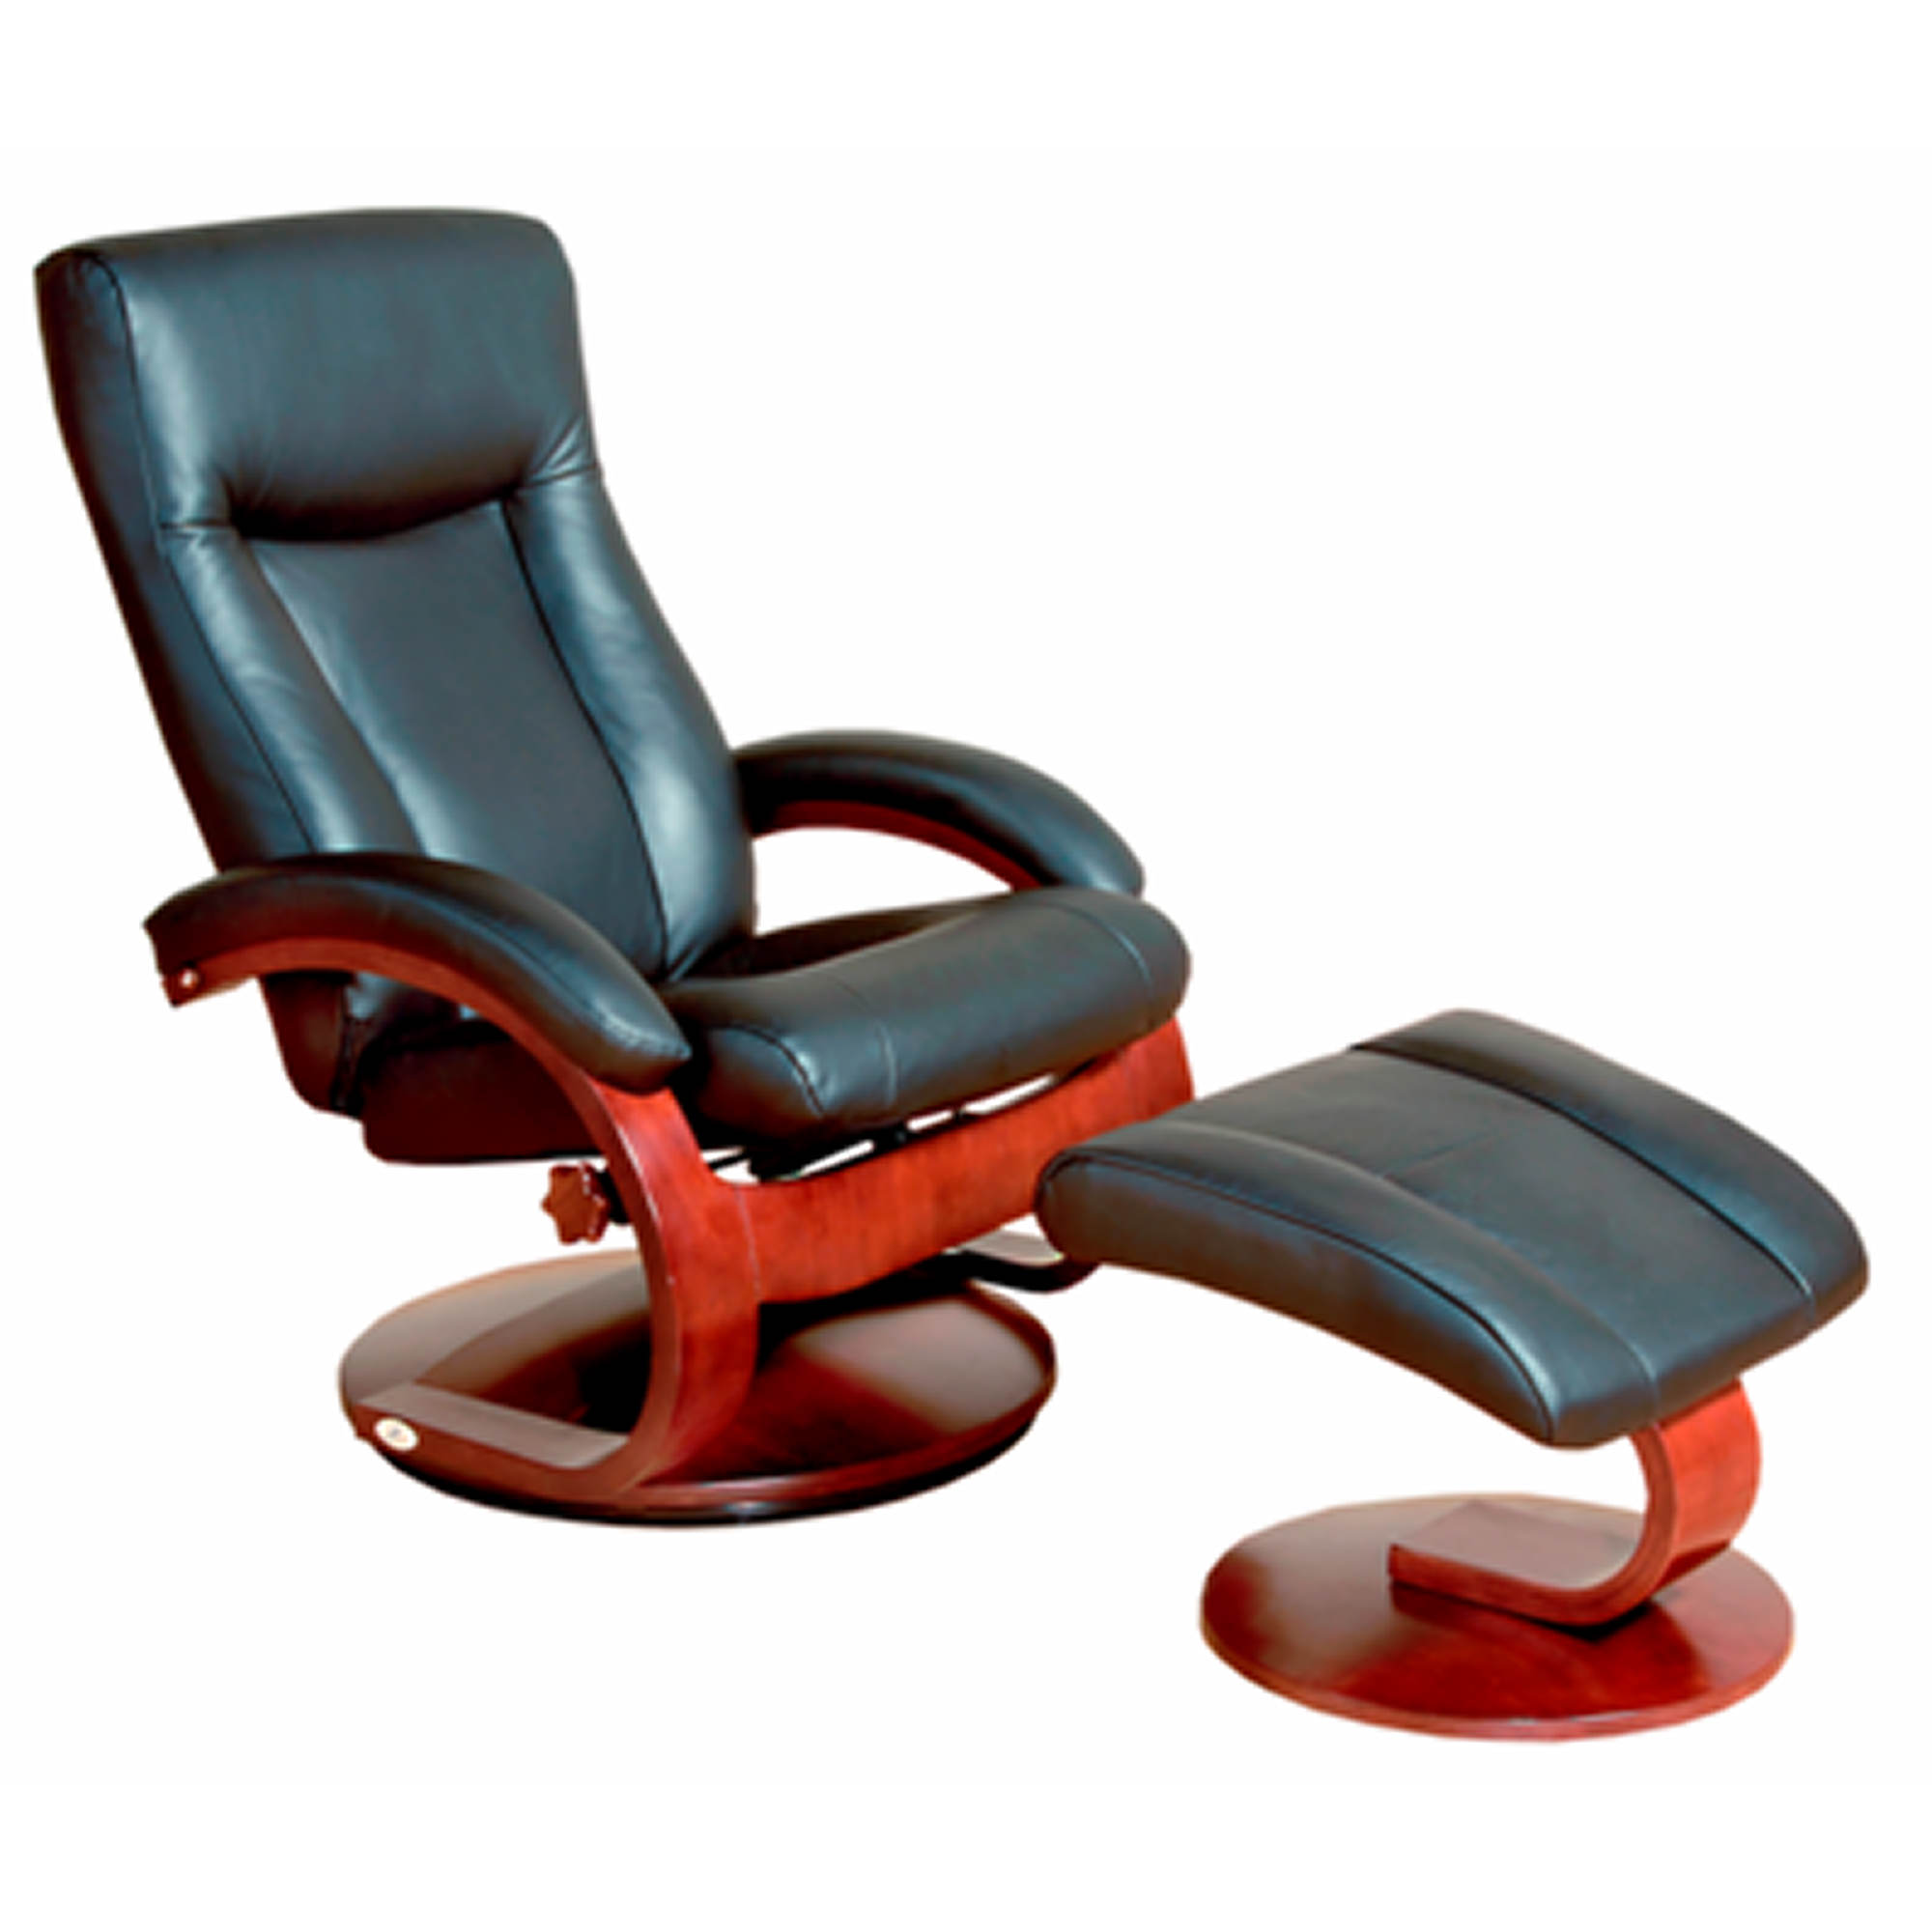 Best Living Room Chair For Lower Back Pain